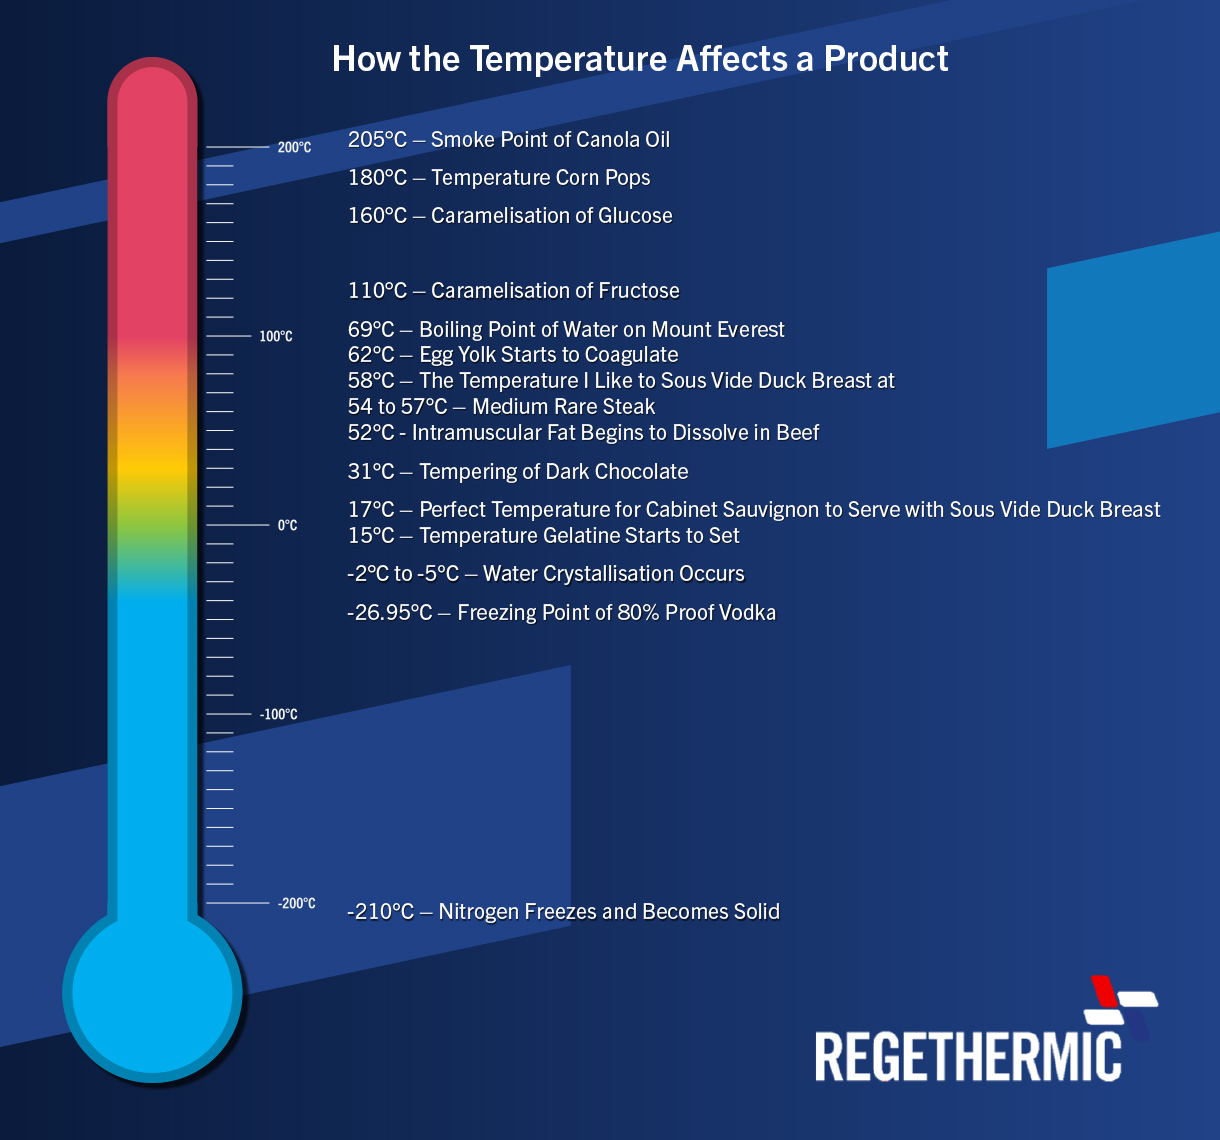 How the Temperature Affects a Product